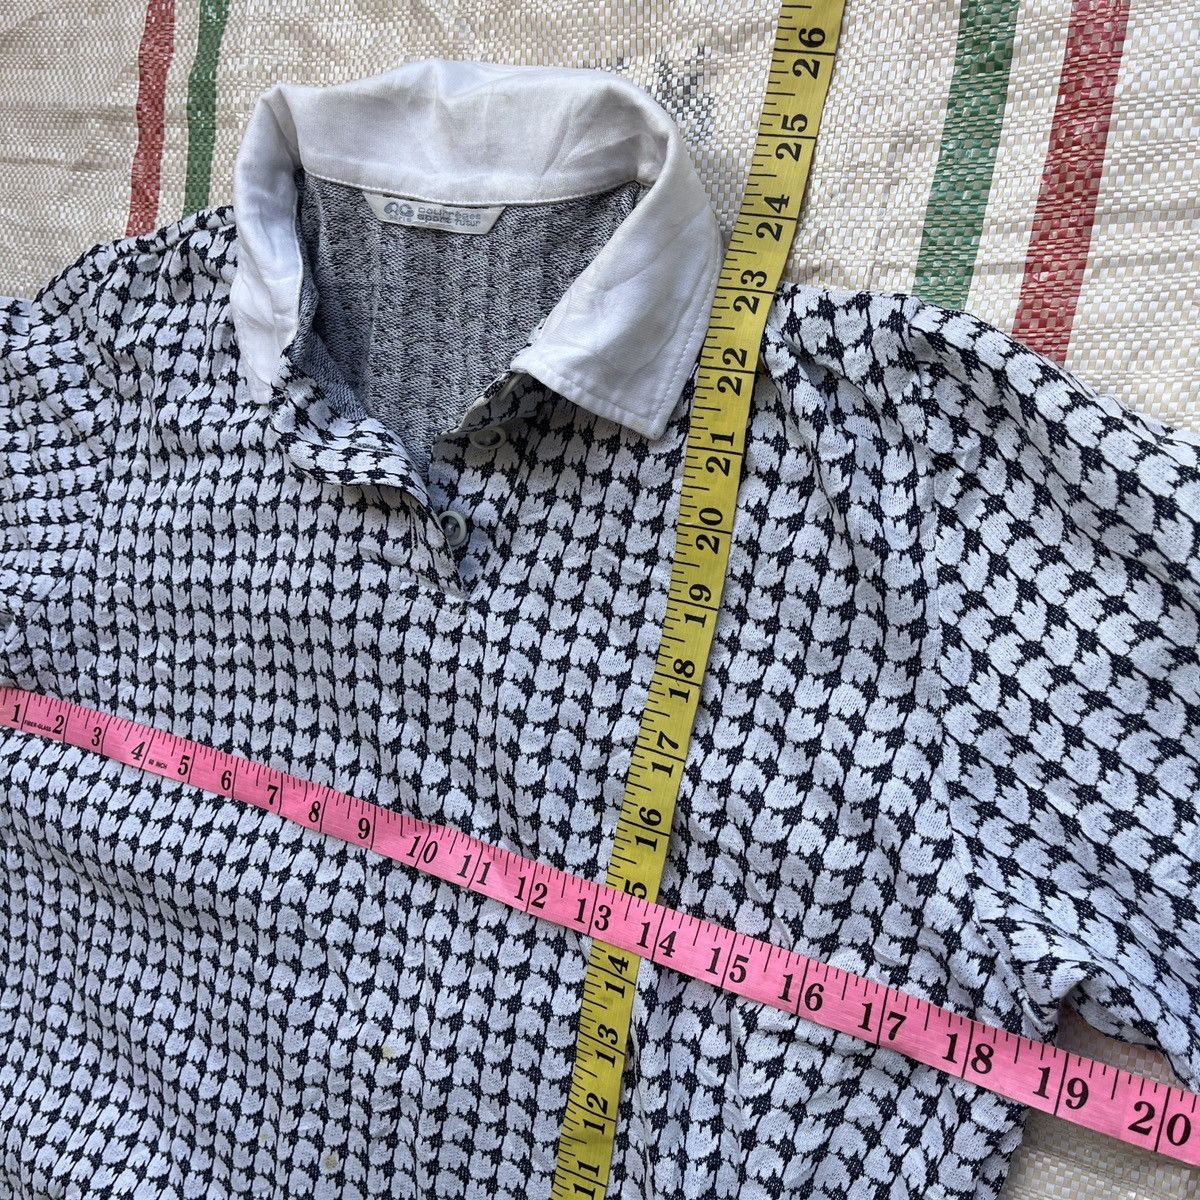 Vintage Monogram Courreges Polo Shirts Made In Japan - 5